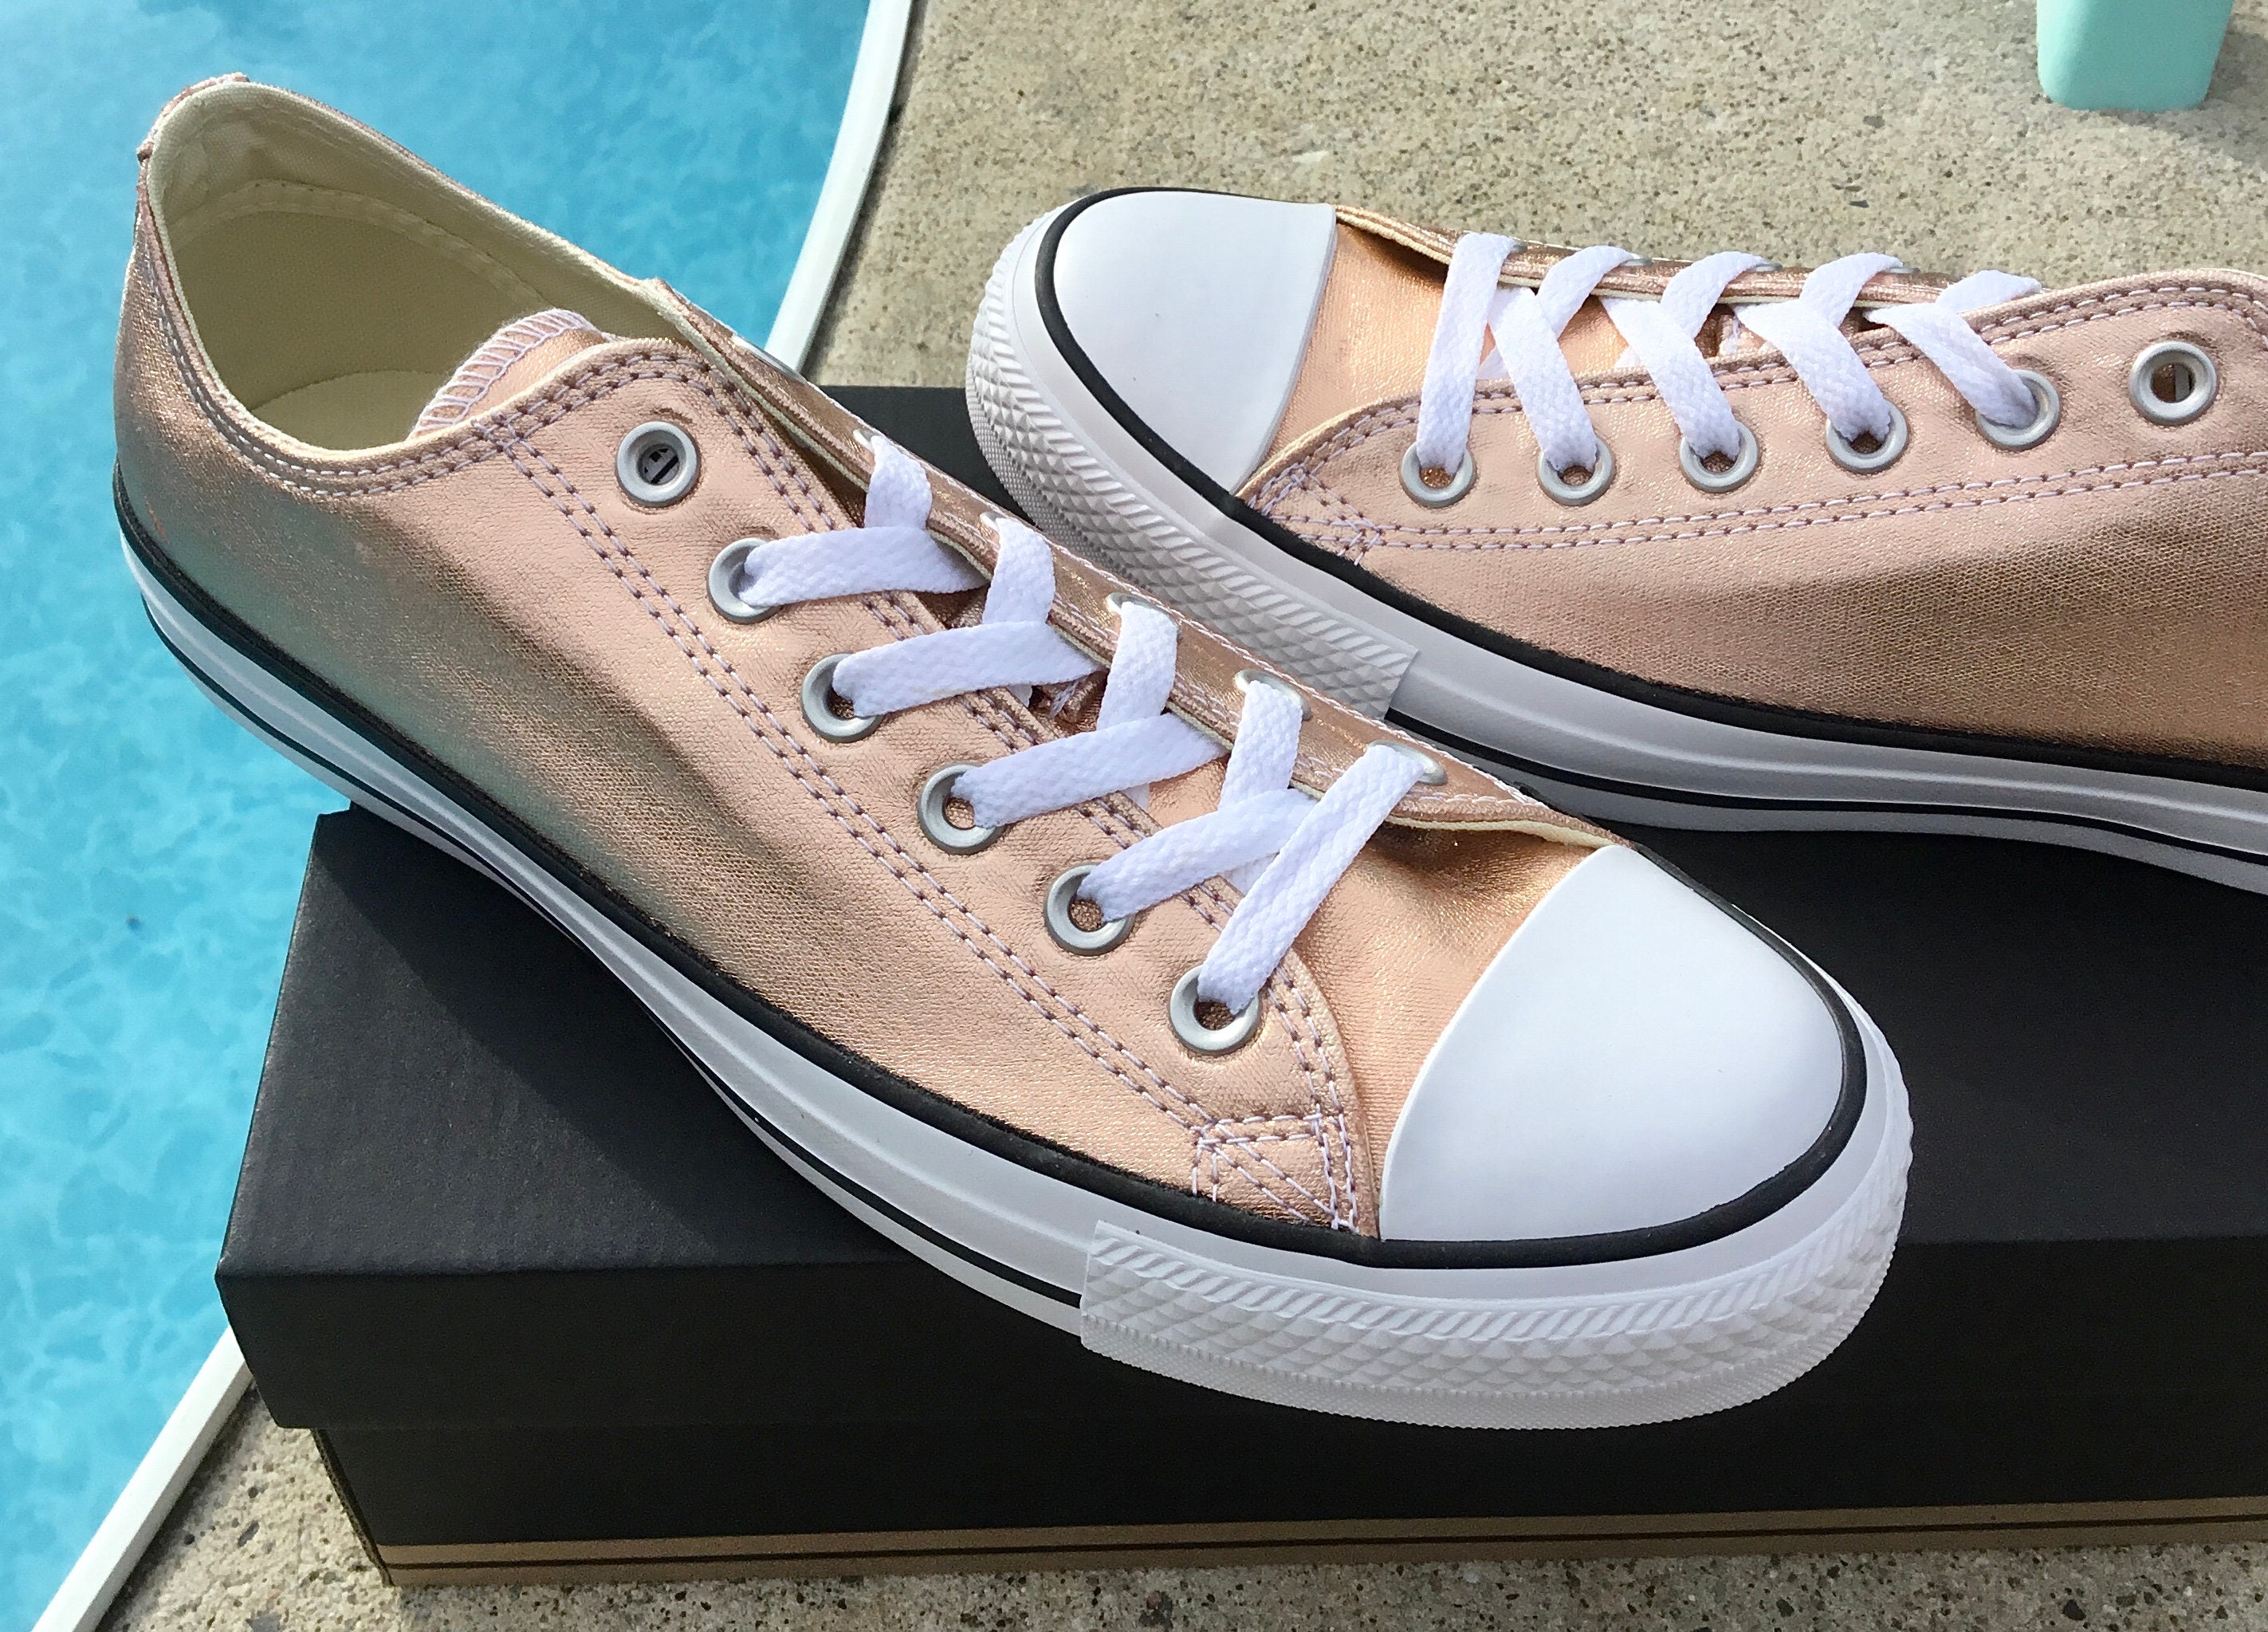 Rose Gold Converse Low Top Blush Copper Metallic w/ Crystal Wedding Chuck Taylor Rhinestone All Star Sneakers Shoes